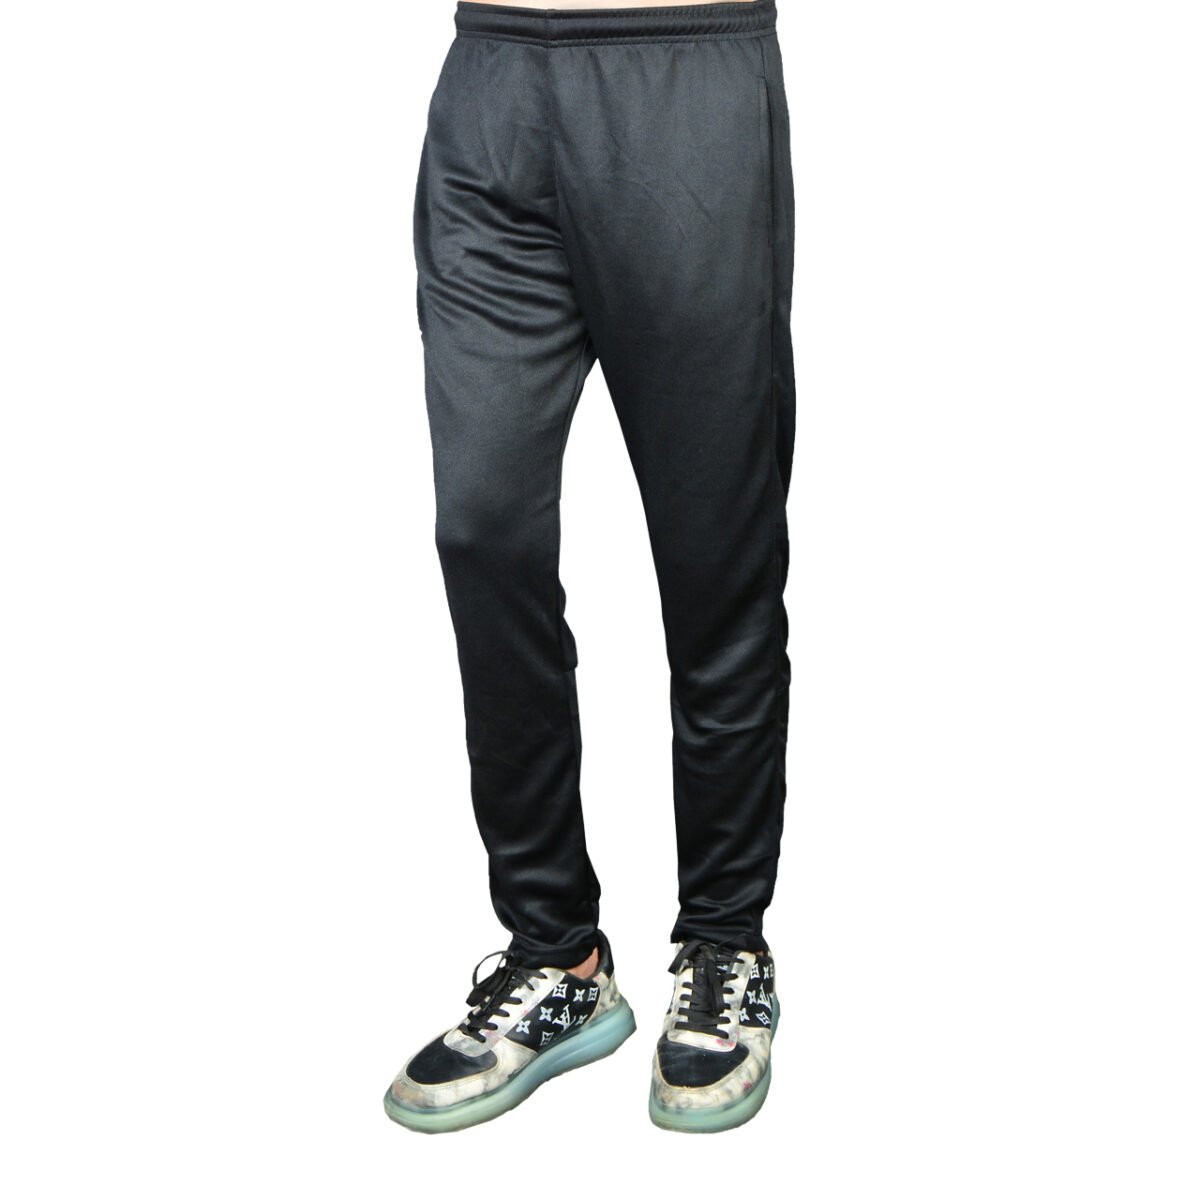 Dri fit trousers for men with white back